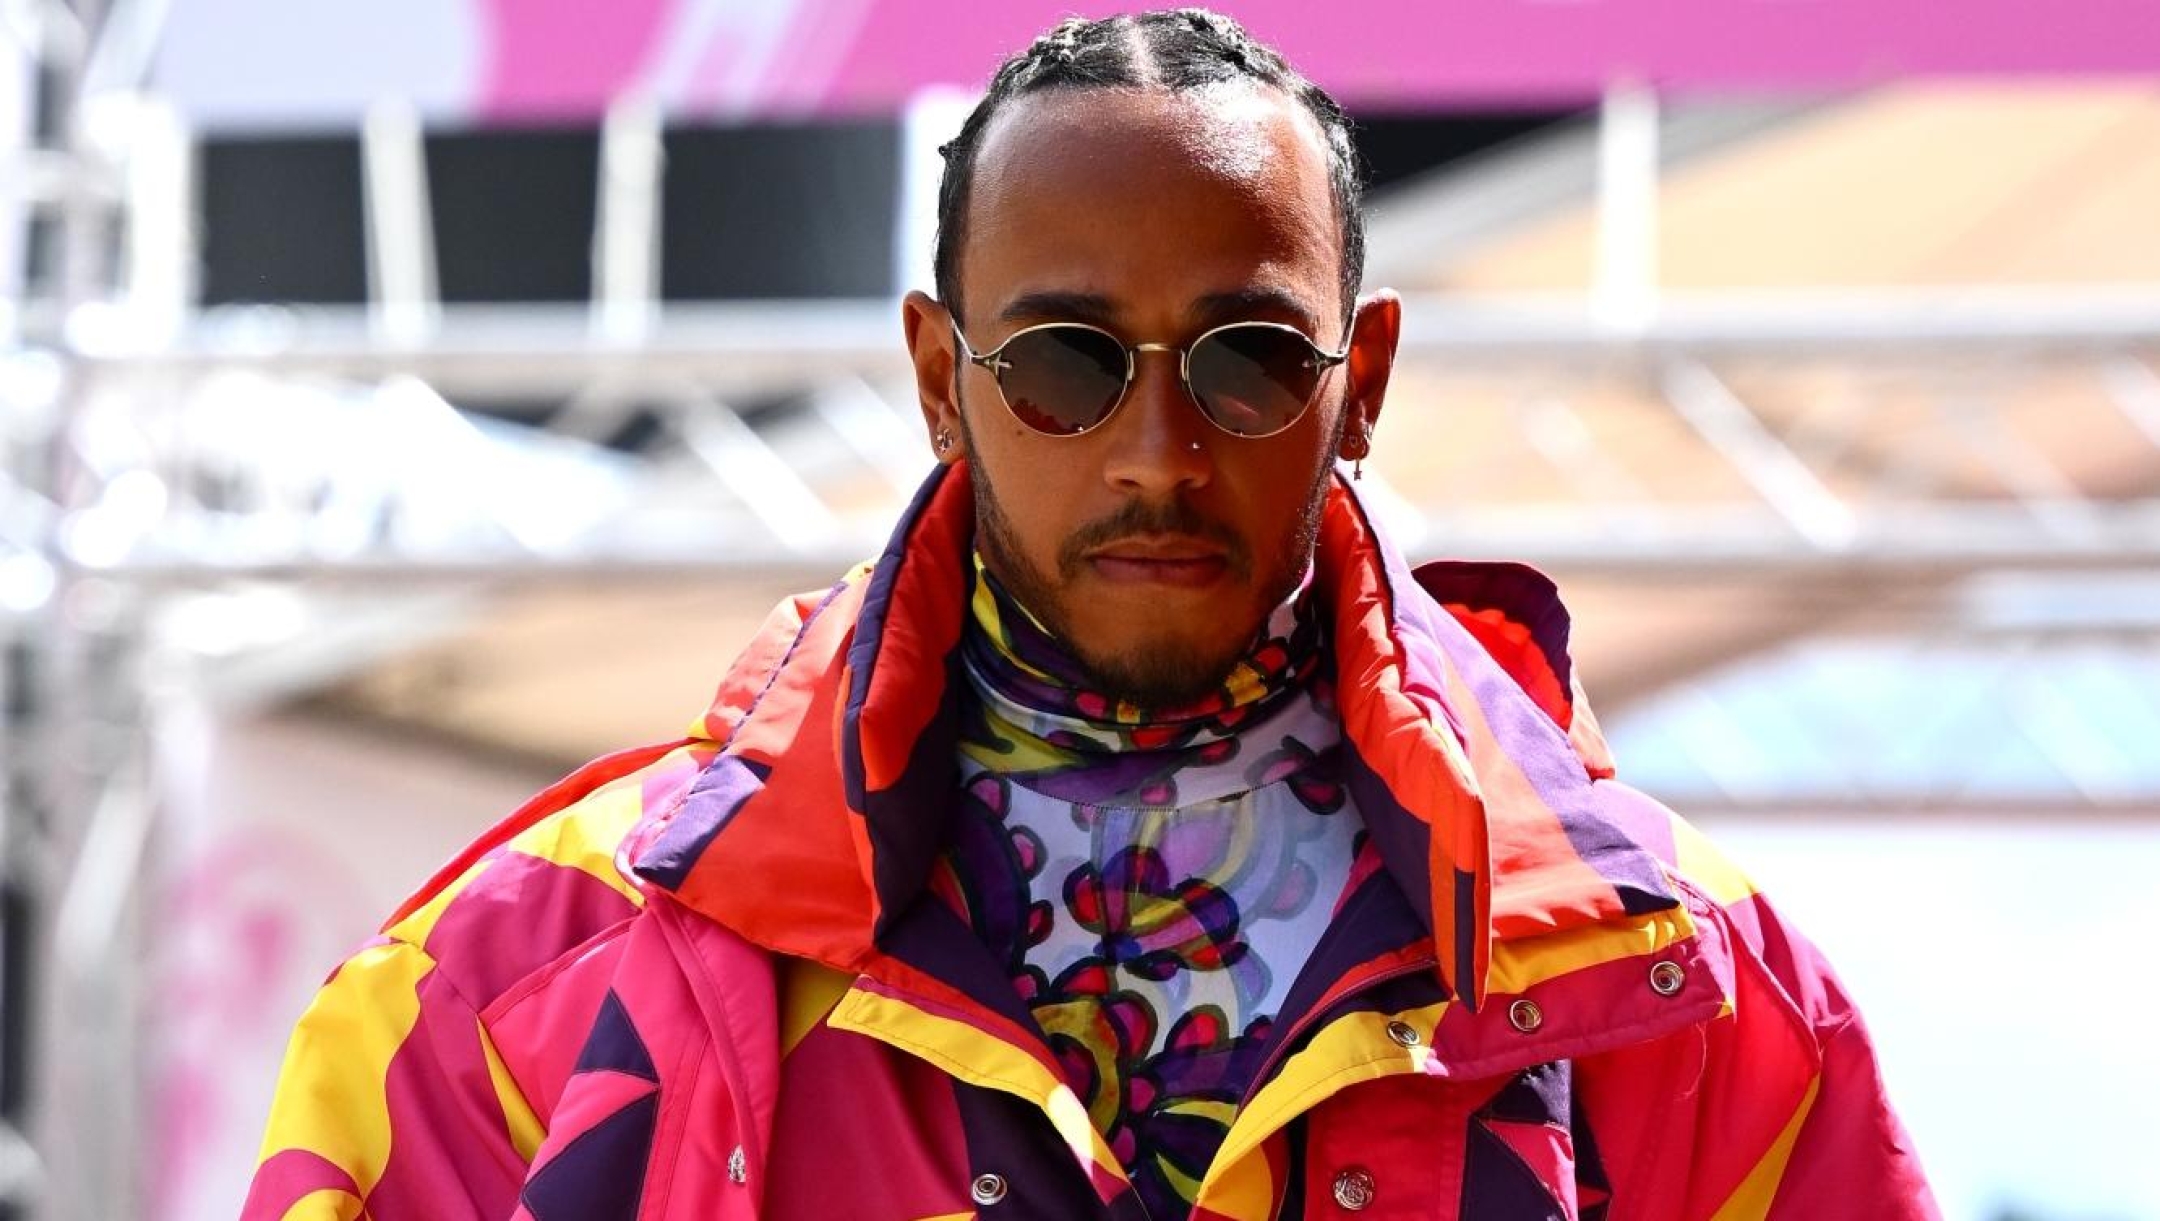 NORTHAMPTON, ENGLAND - JUNE 30: Lewis Hamilton of Great Britain and Mercedes walks in the Paddock during previews ahead of the F1 Grand Prix of Great Britain at Silverstone on June 30, 2022 in Northampton, England. (Photo by Clive Mason/Getty Images)